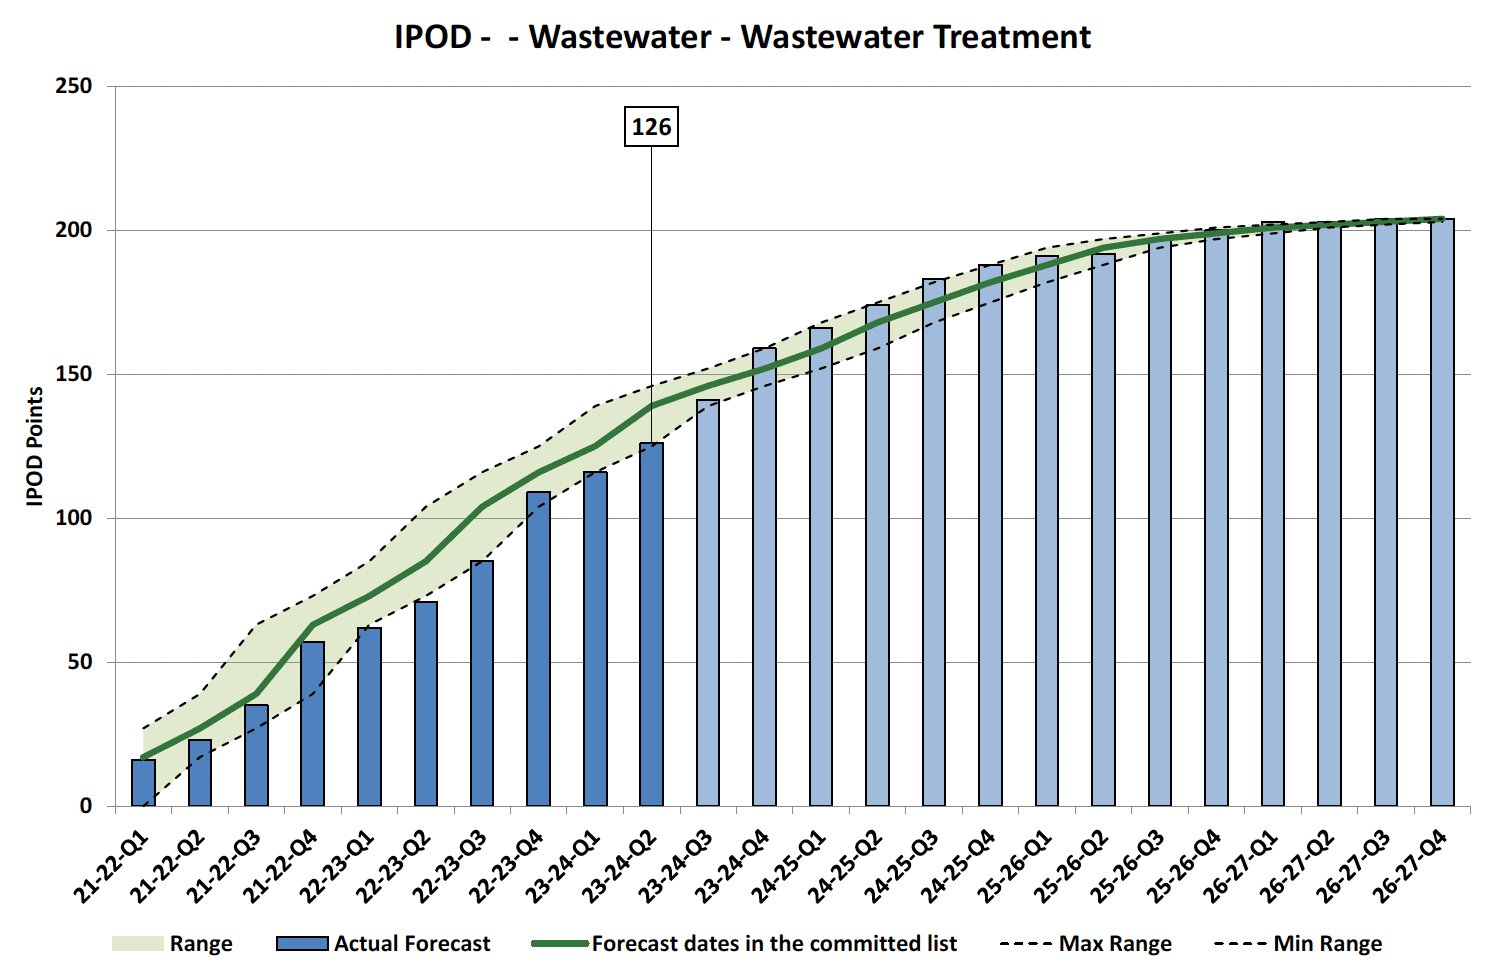 Chart showing IPOD points achieved or forecast for all milestones against target range for Wastewater Treatment Projects in Wastewater Portfolio